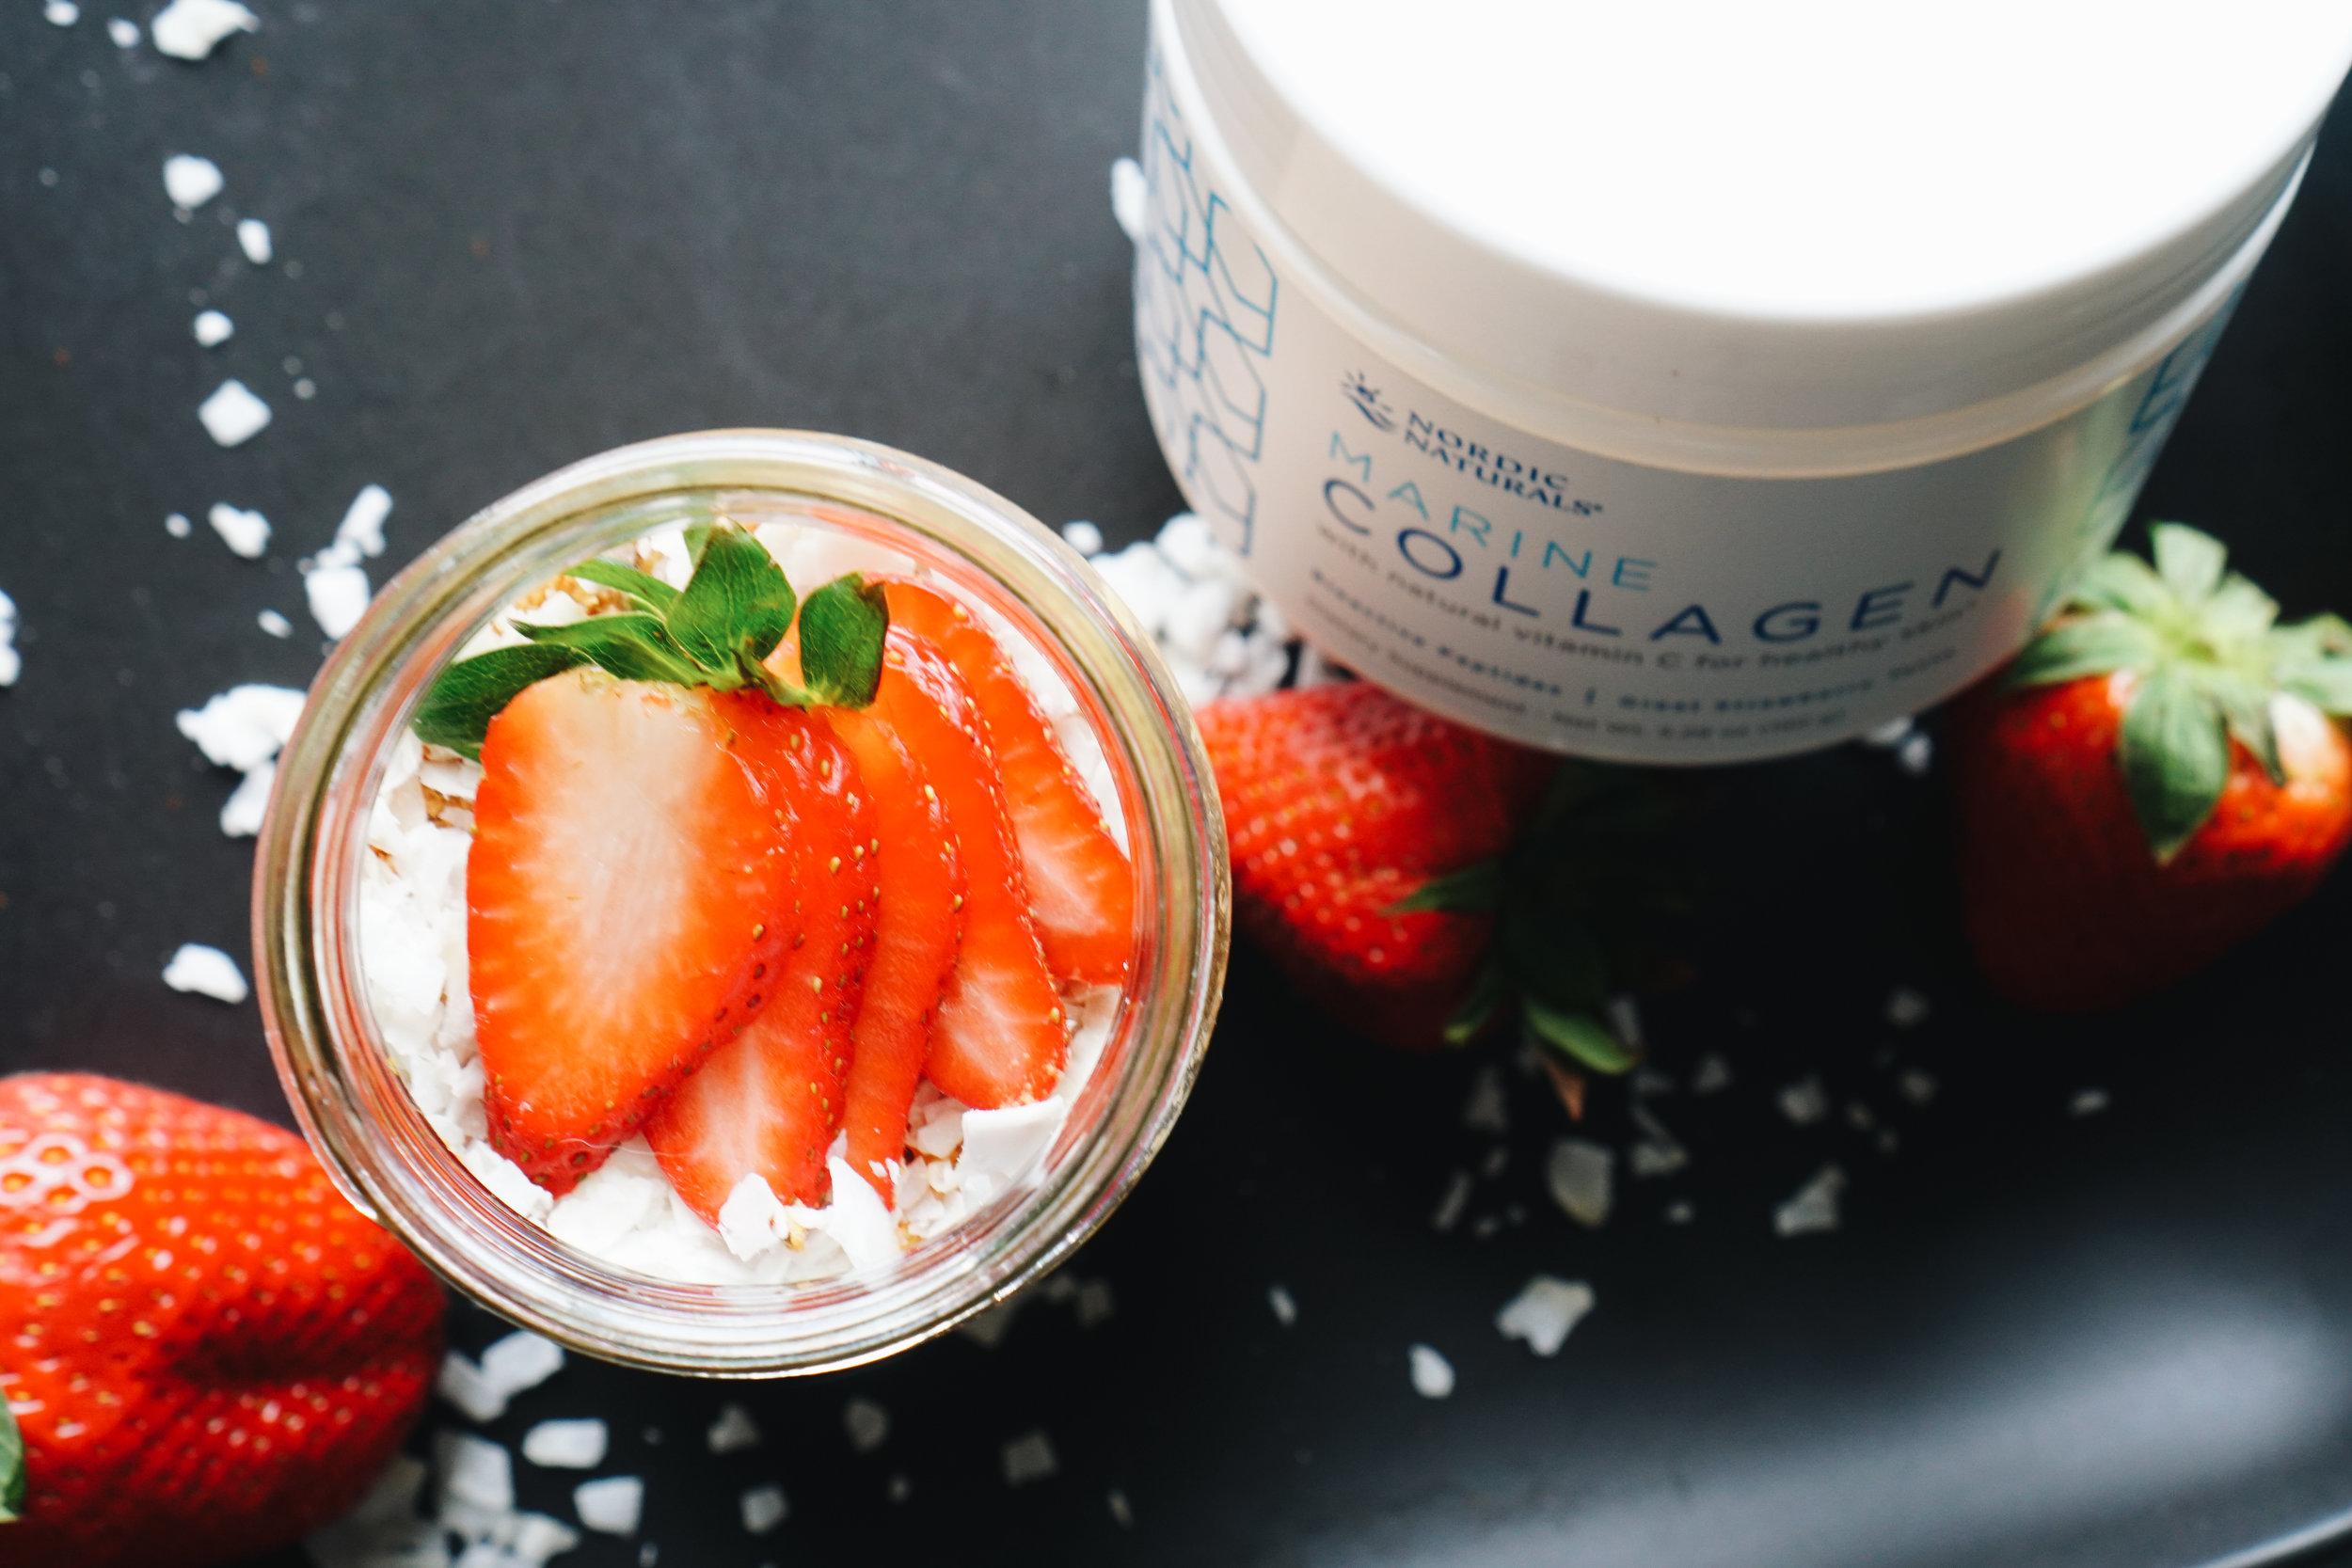 Nordic Naturals Collagen Strawberry Fields Collagen Chia Pudding  - healthy meals, gluten free, keto friendly, low carb - www.letsregale.com _ 7.jpg